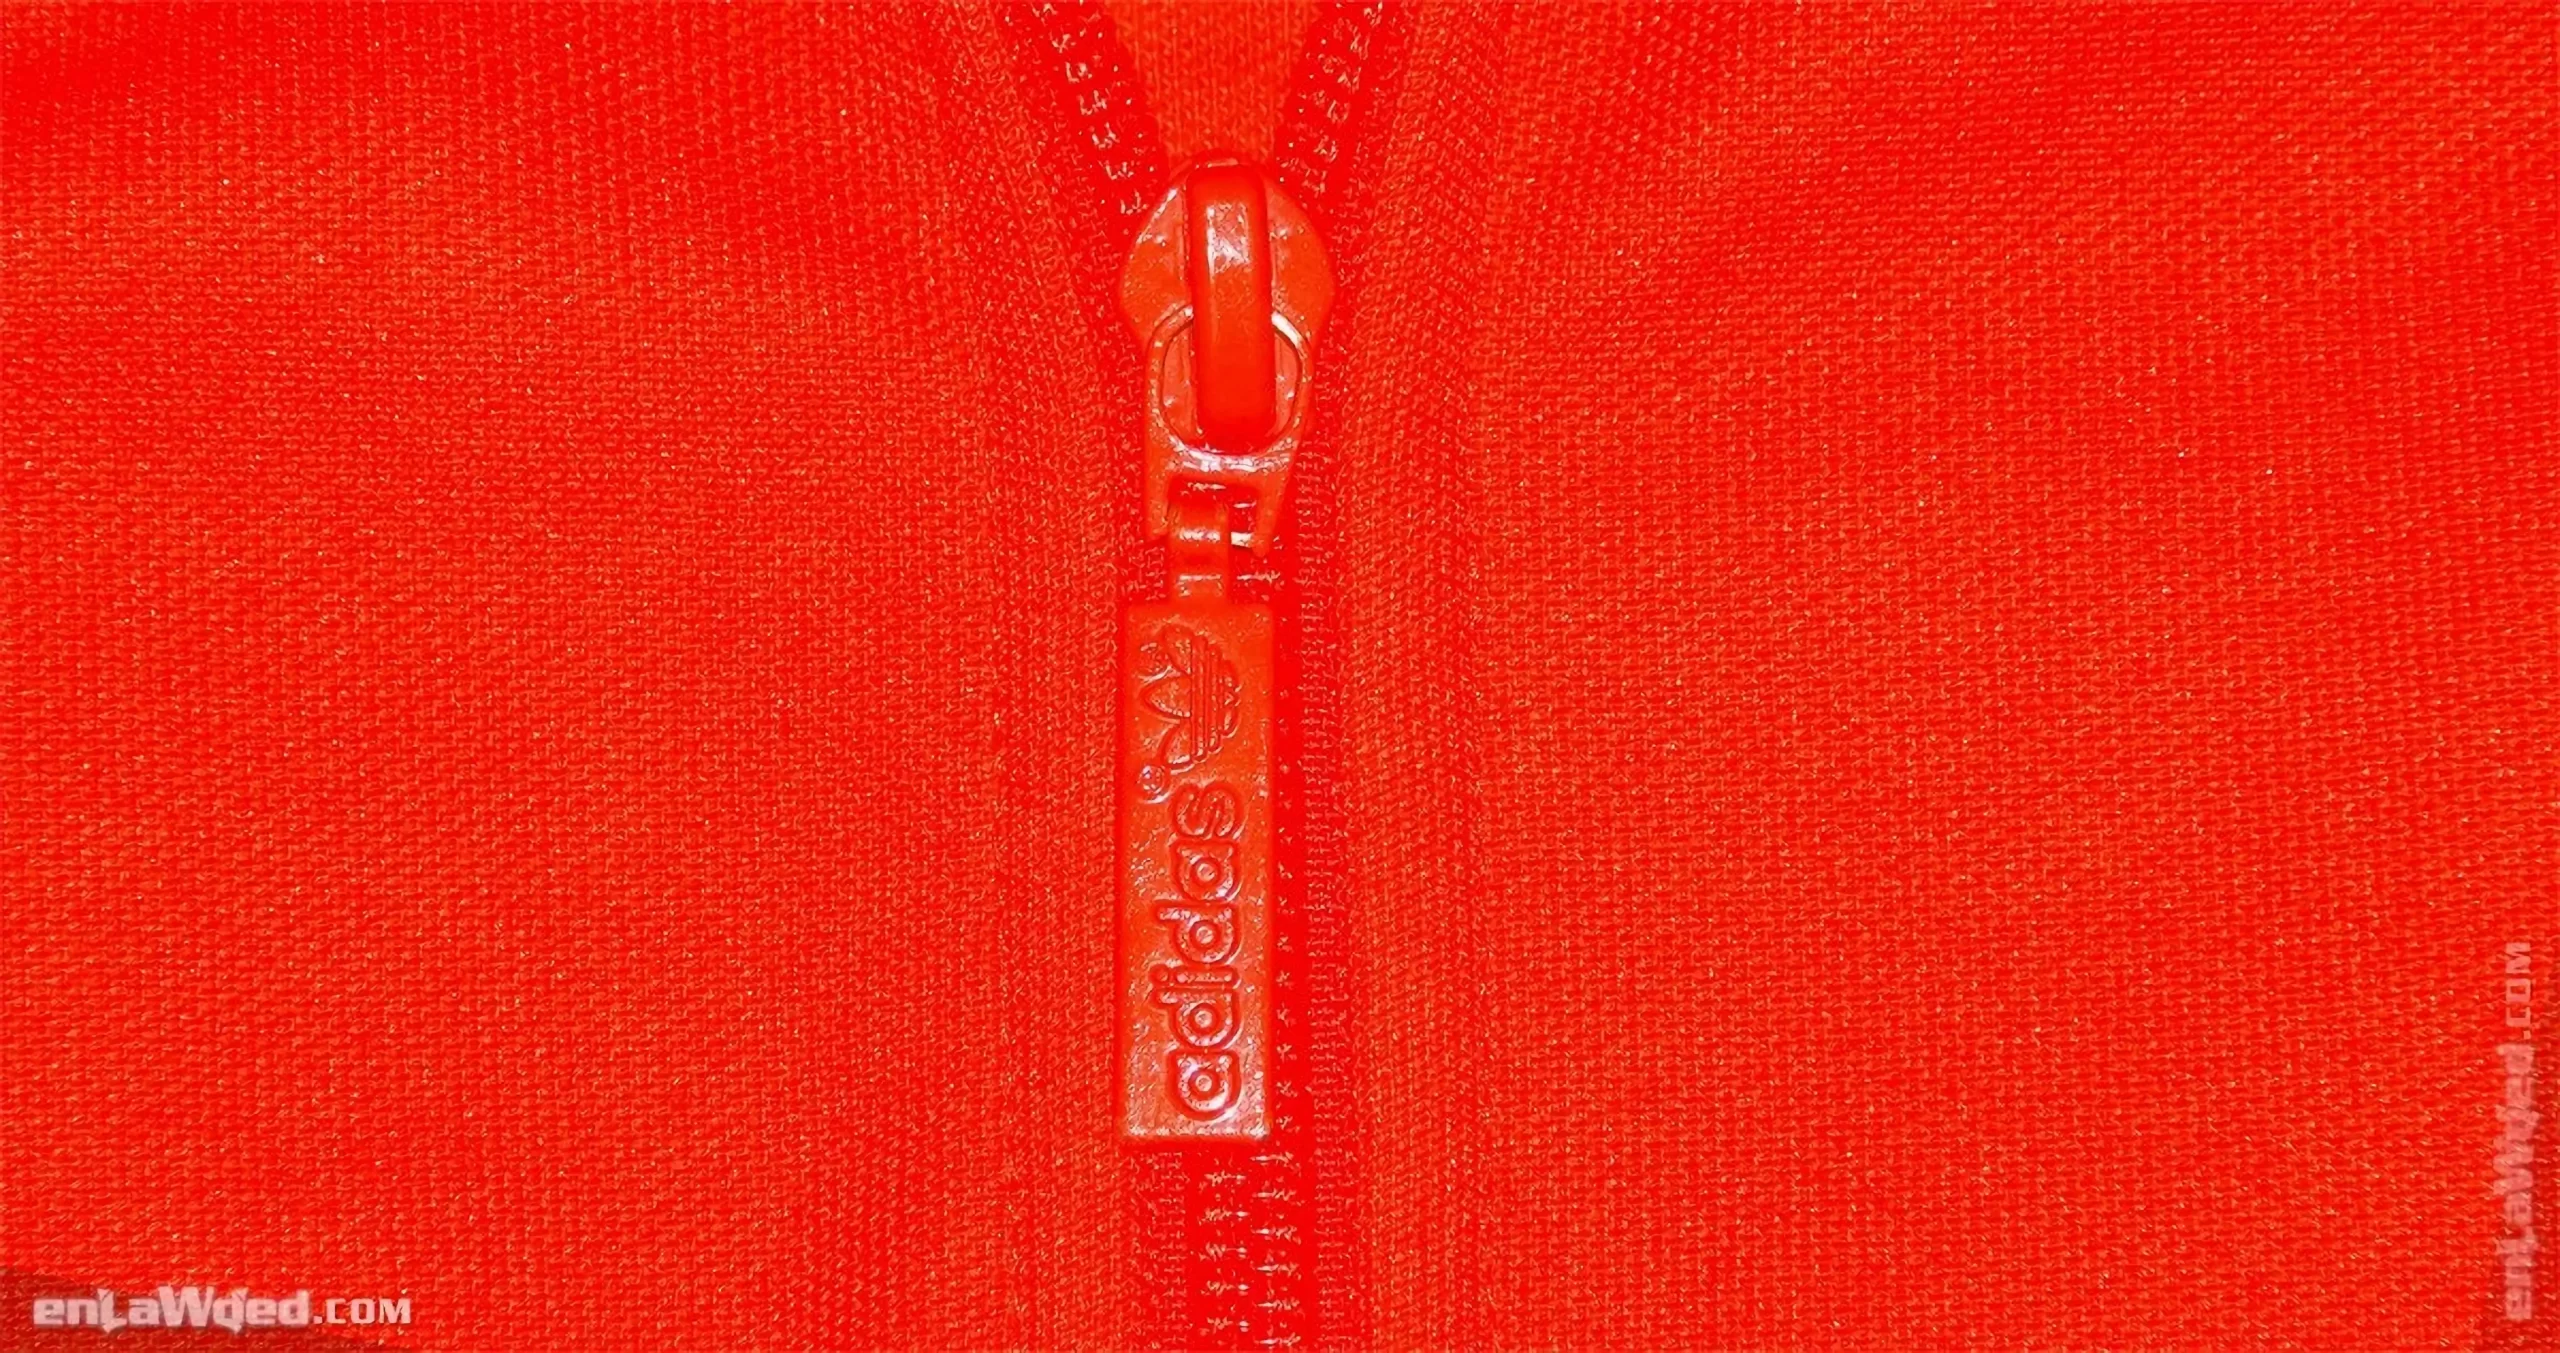 11th interior view of the Adidas Originals Netherlands 1974 Track Top